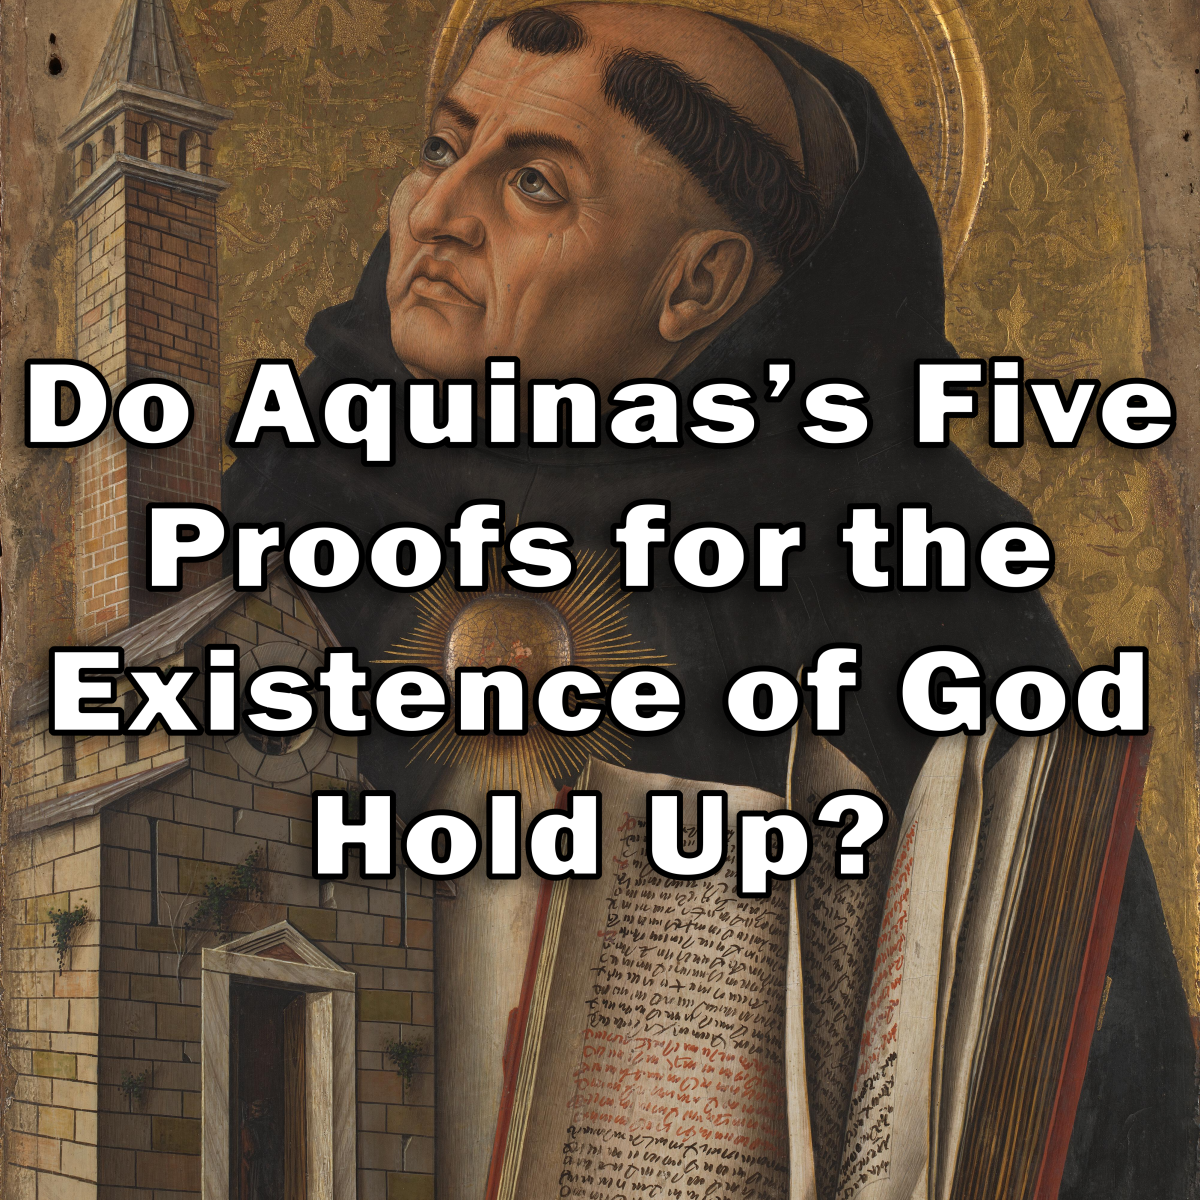 Do Aquinas’s Five Proofs for the Existence of God Hold Up?